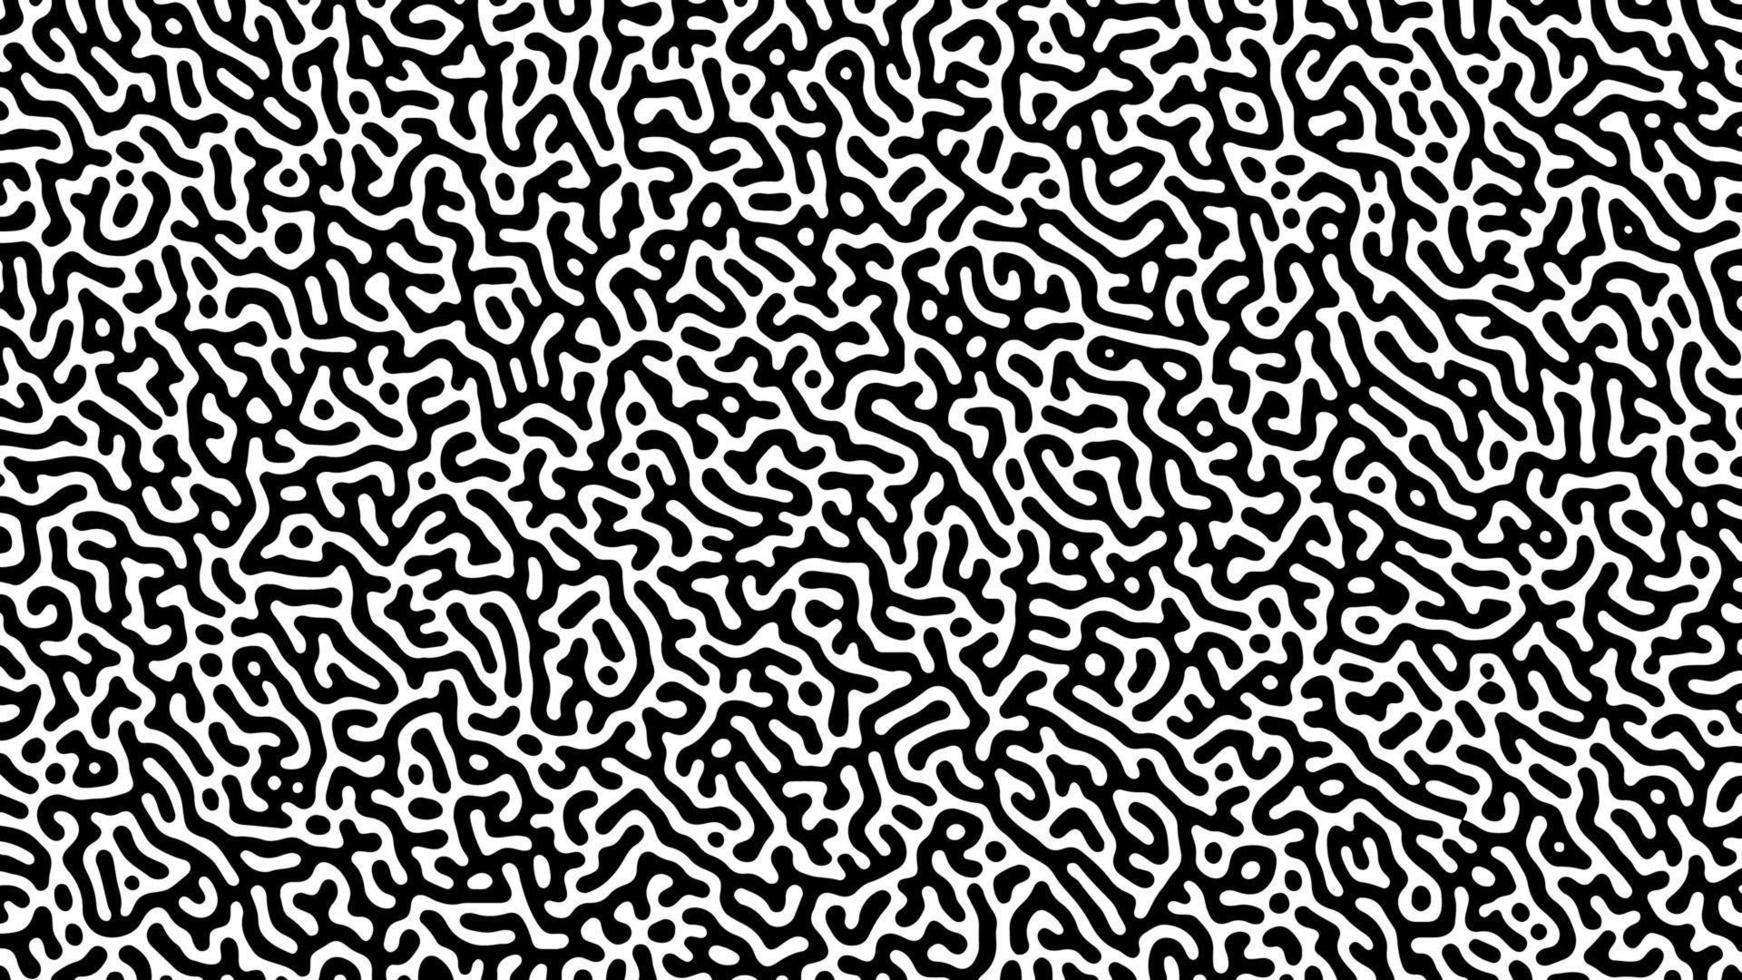 Monochrome Turing reaction background. Abstract diffusion pattern with chaotic shapes. Vector illustration.